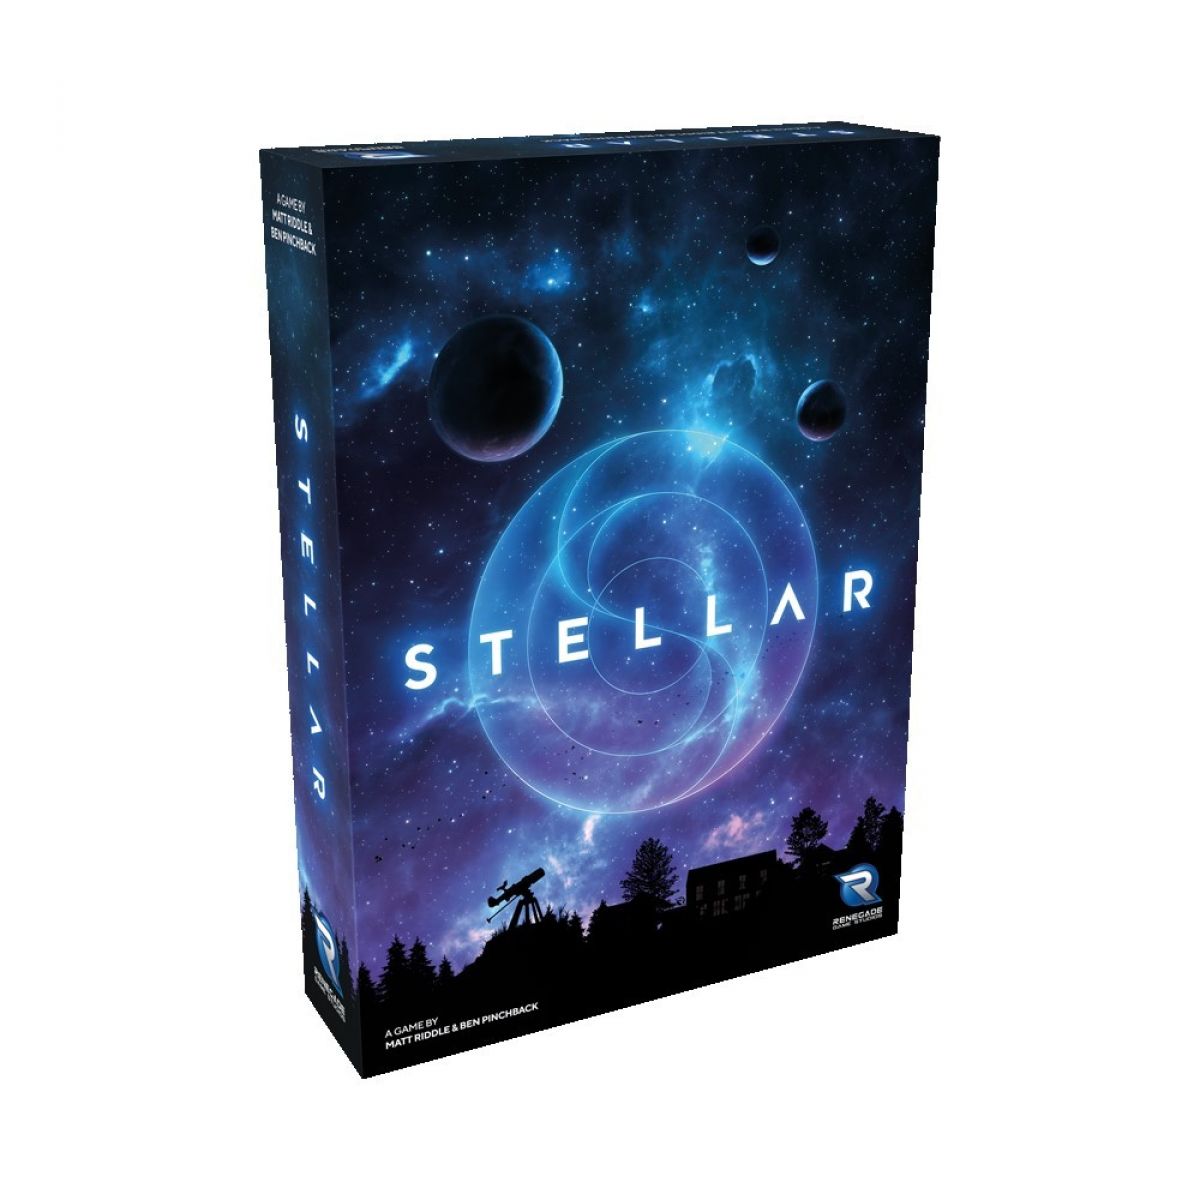 best way to learn how to play stellaris